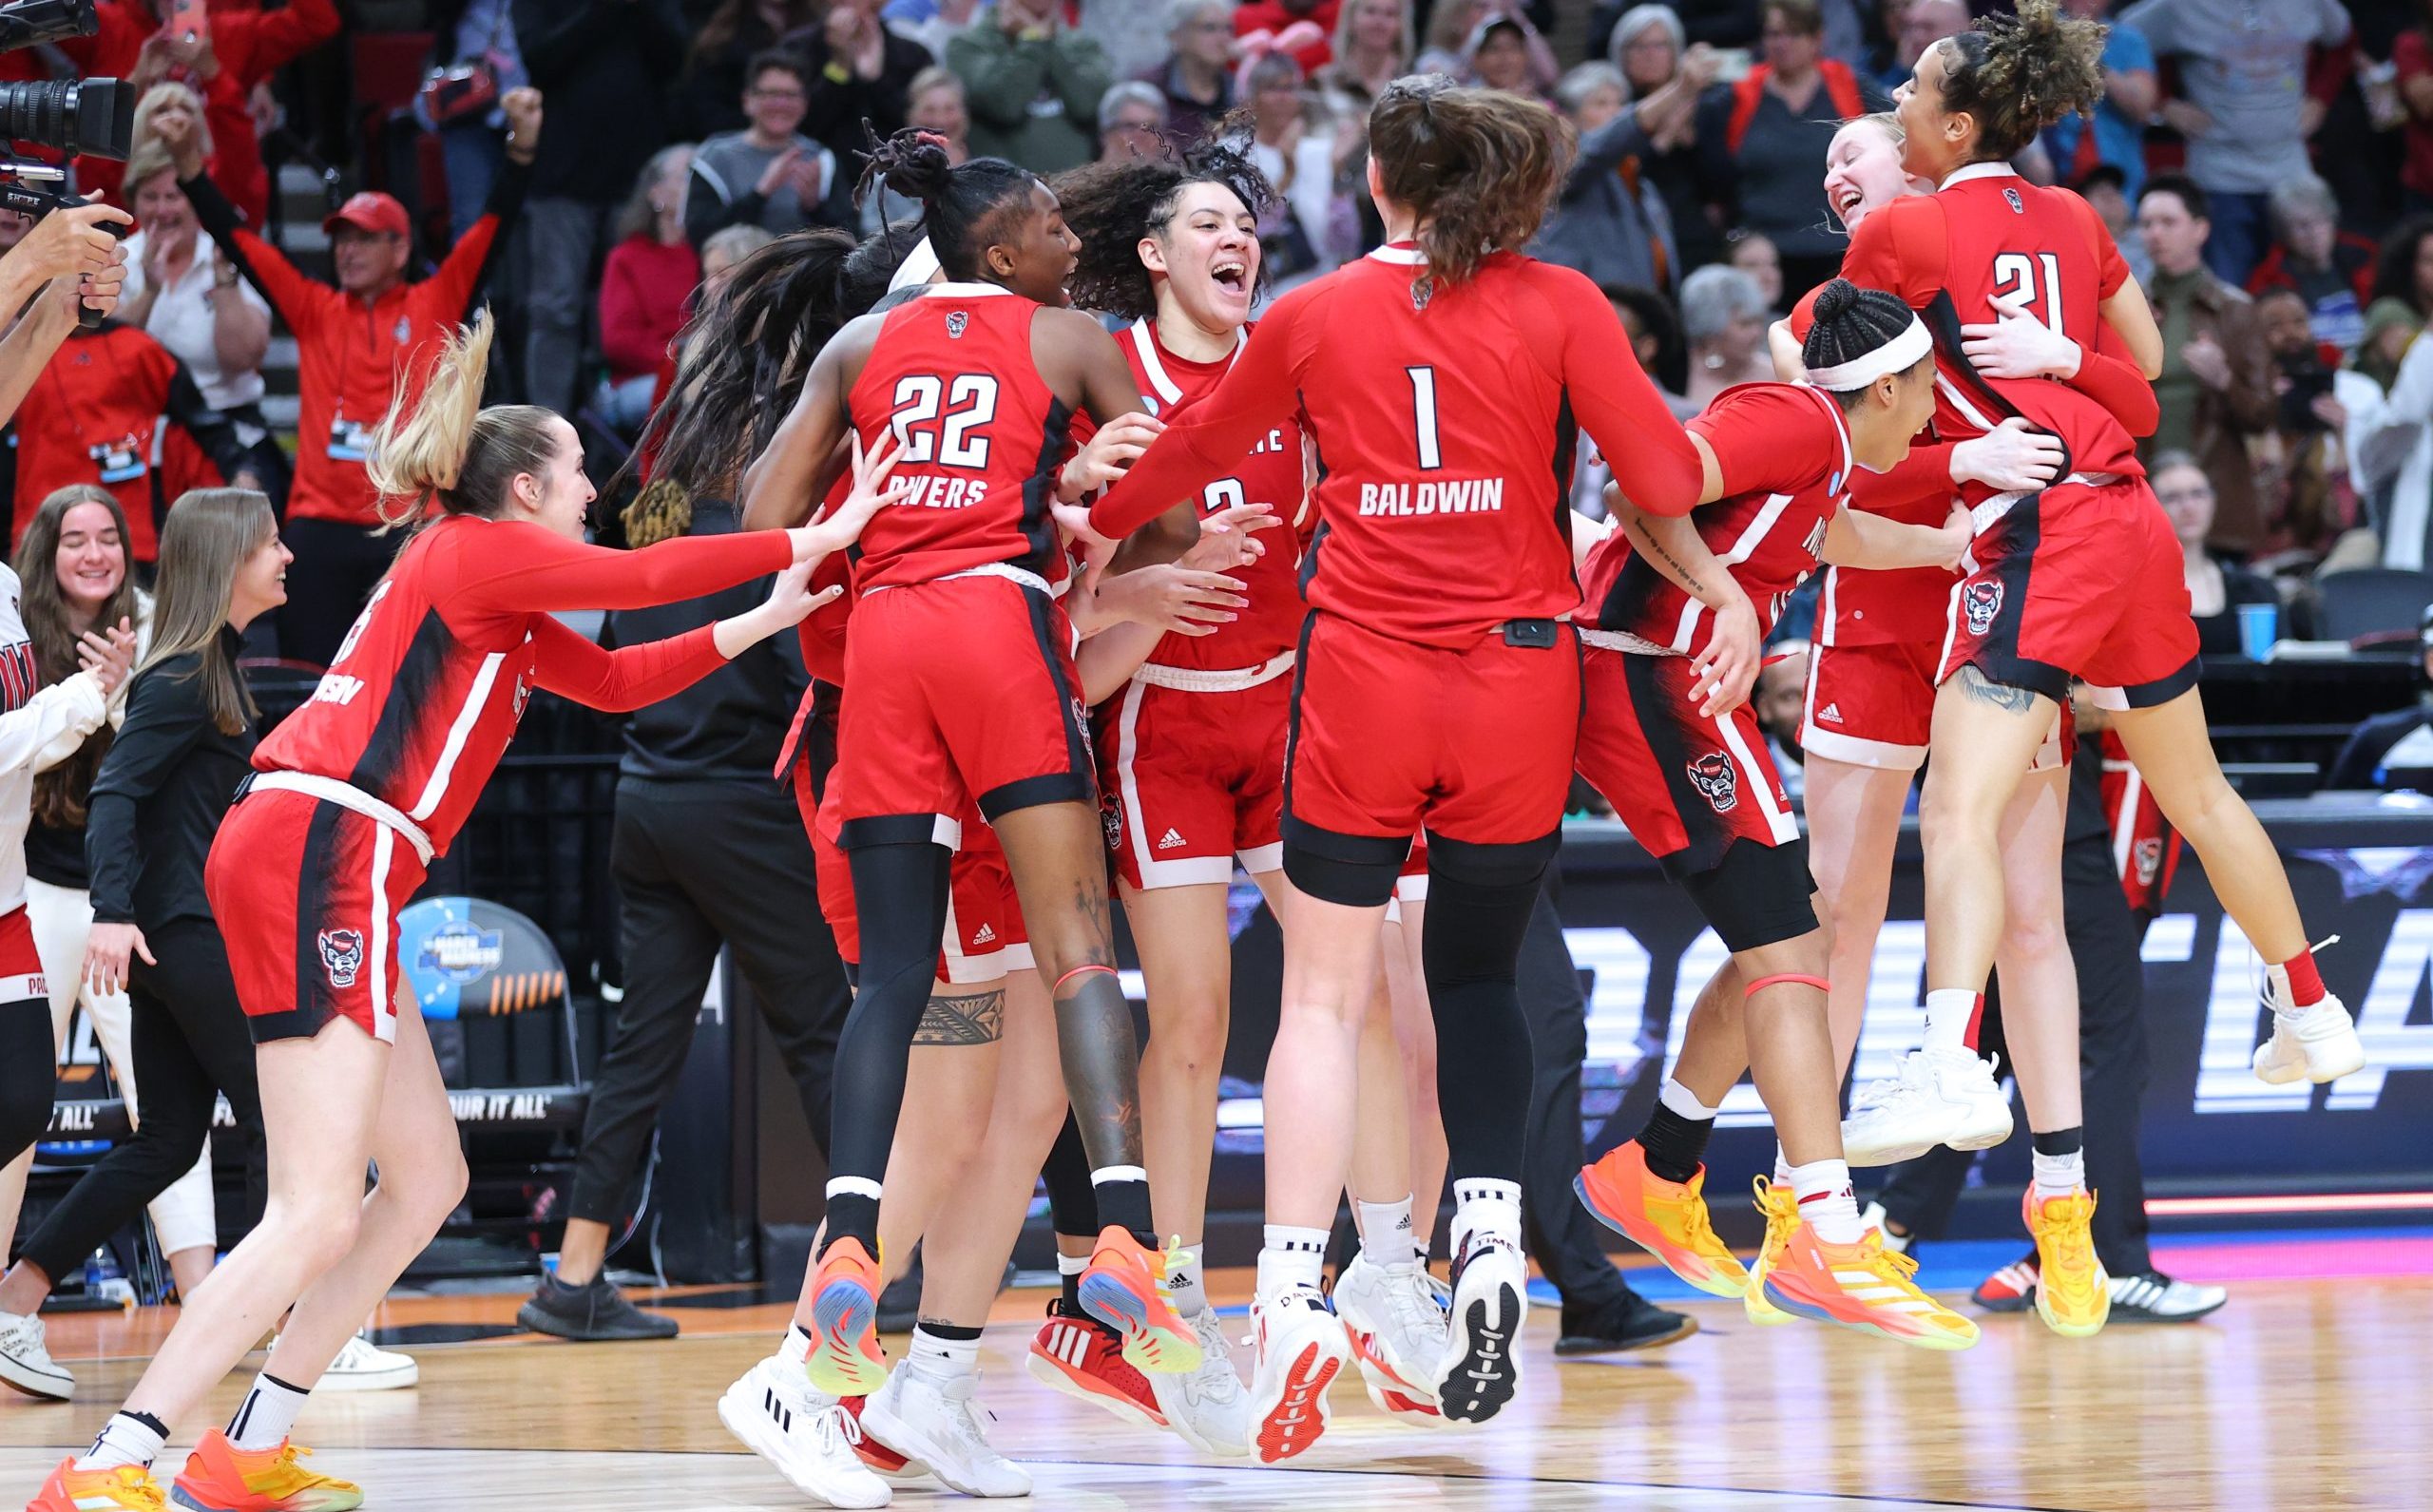 PORTLAND, OREGON - MARCH 31: The NC State Wolfpack celebrate their 76-66 win over the Texas Longhorns during the Elite Eight round of the 2024 NCAA Women's Basketball Tournament held at the Moda Center on March 31, 2024 in Portland, Oregon. (Photo by Alysa Rubin/NCAA Photos via Getty Images)